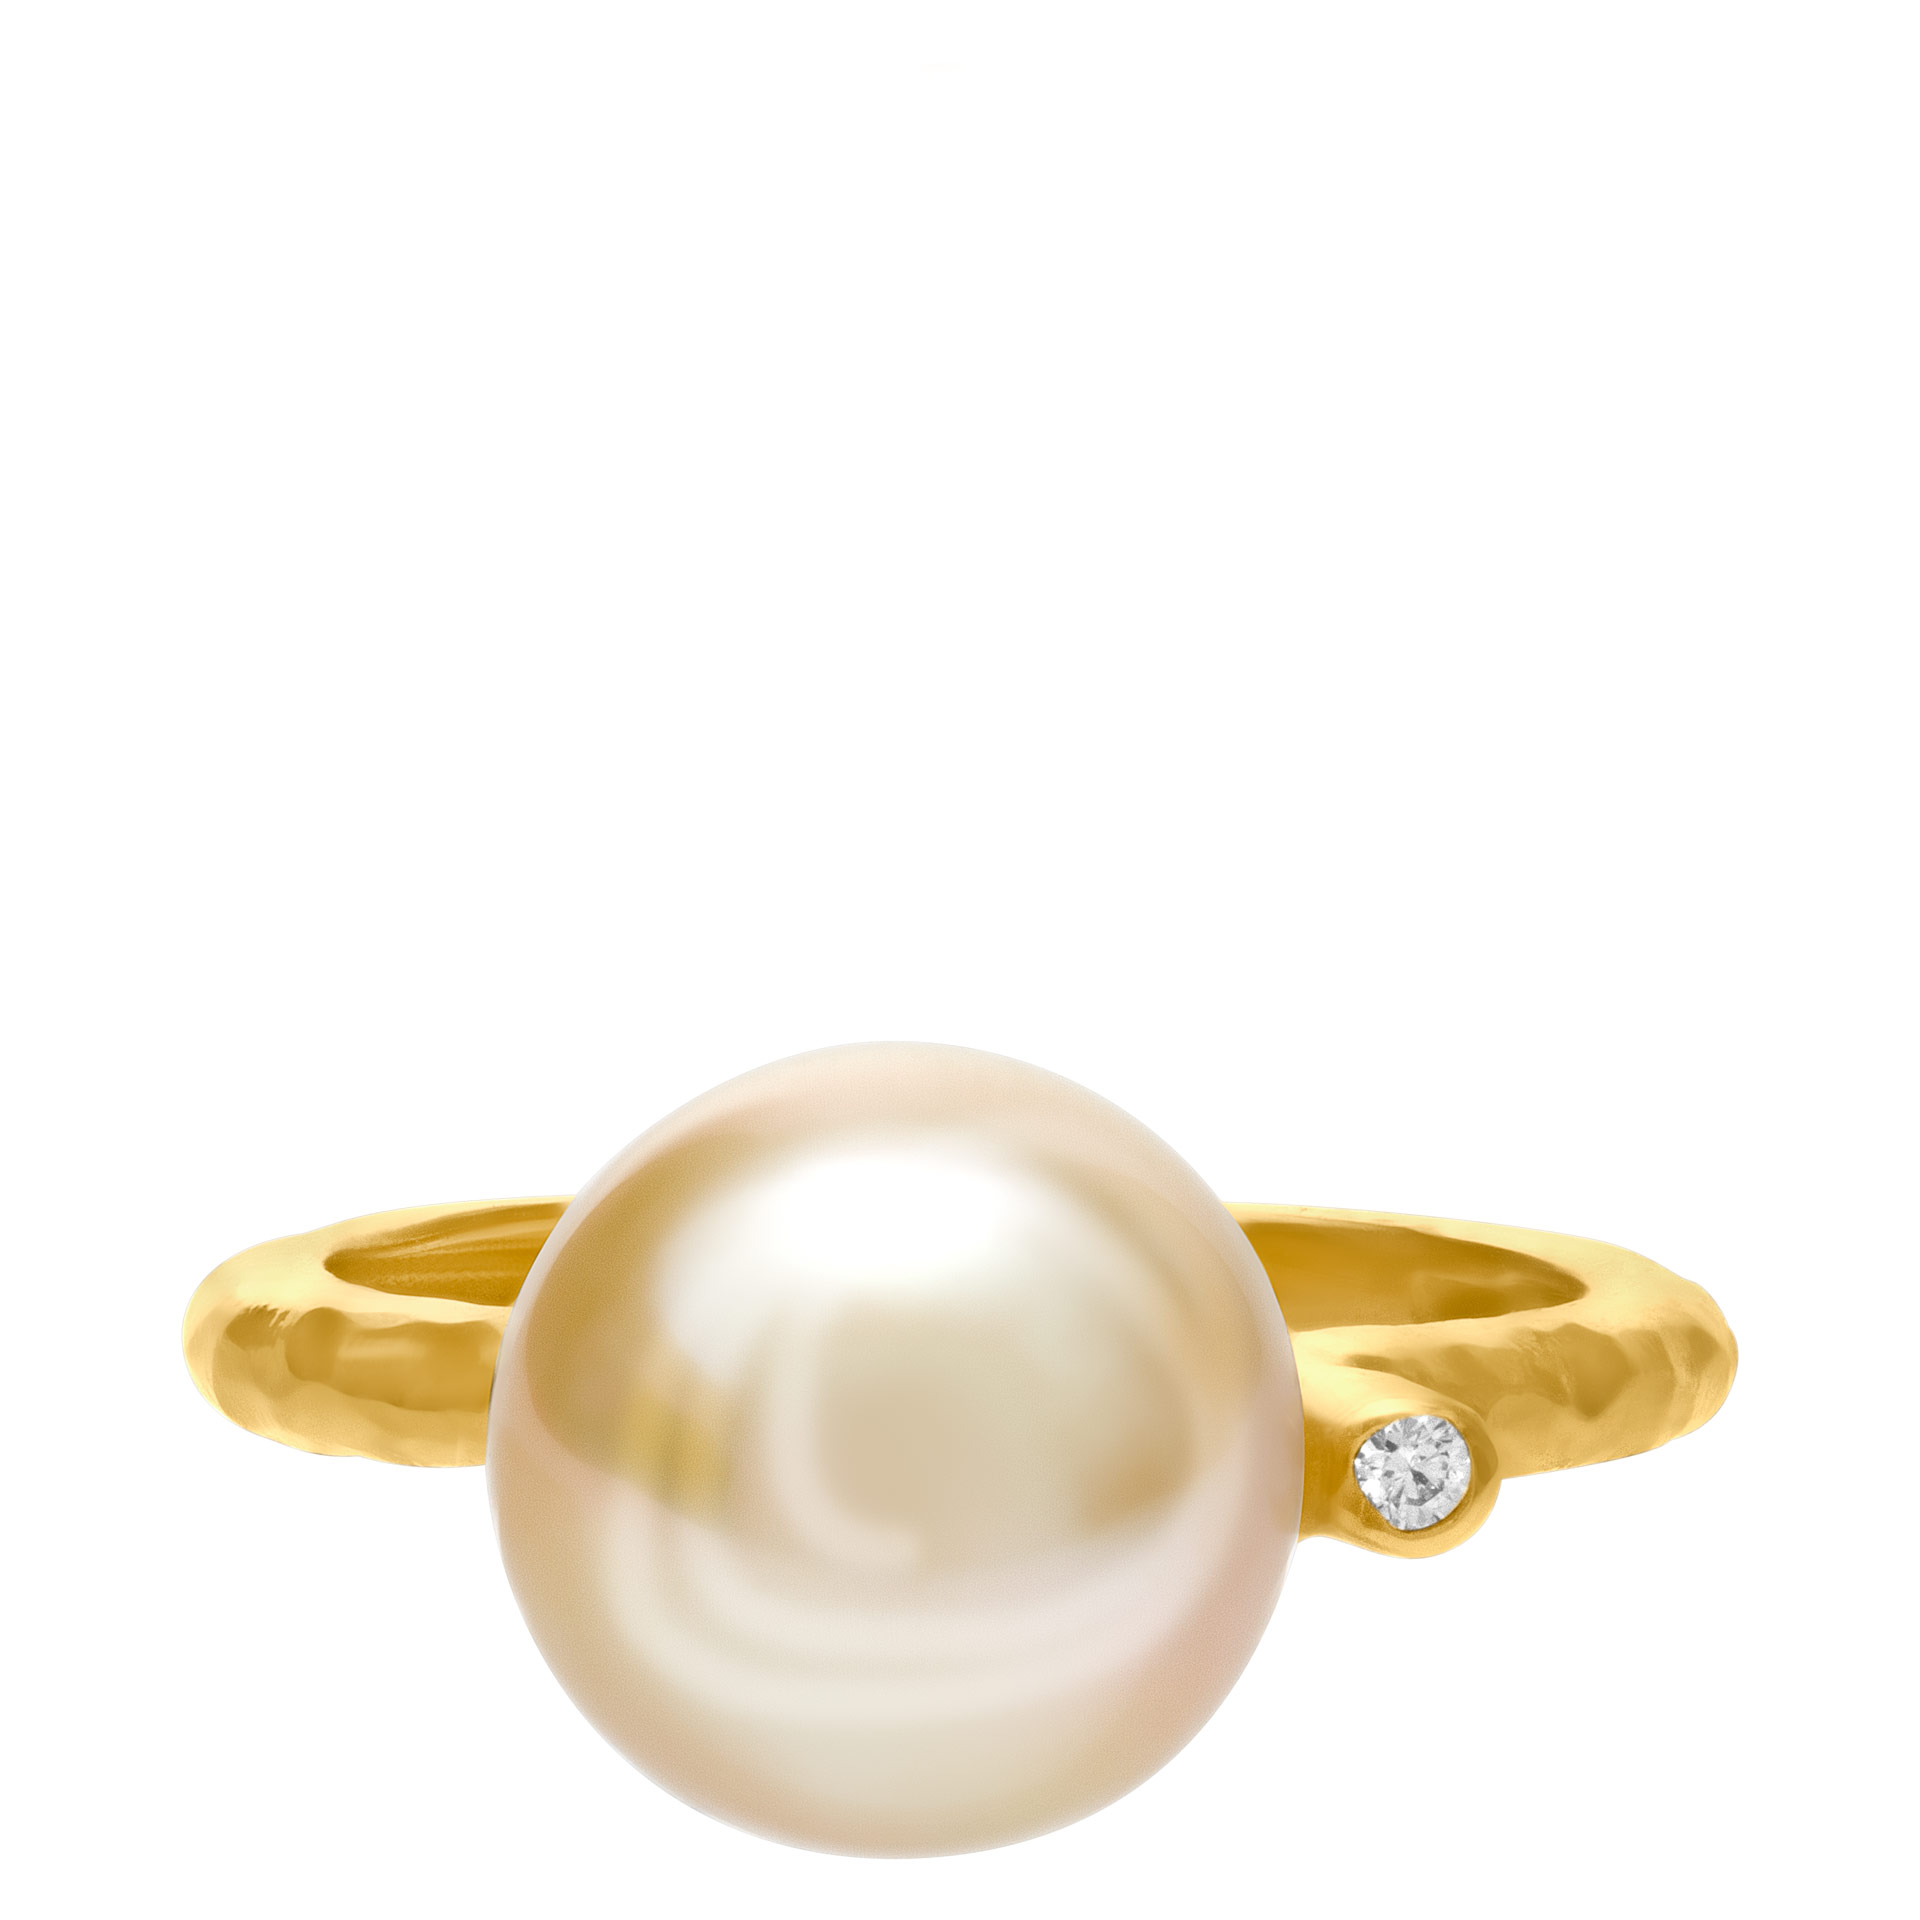 Golden South Sea Pearl (10.5 x11mm) ring, in 18k yellow gold with 0.02 carat diamond.